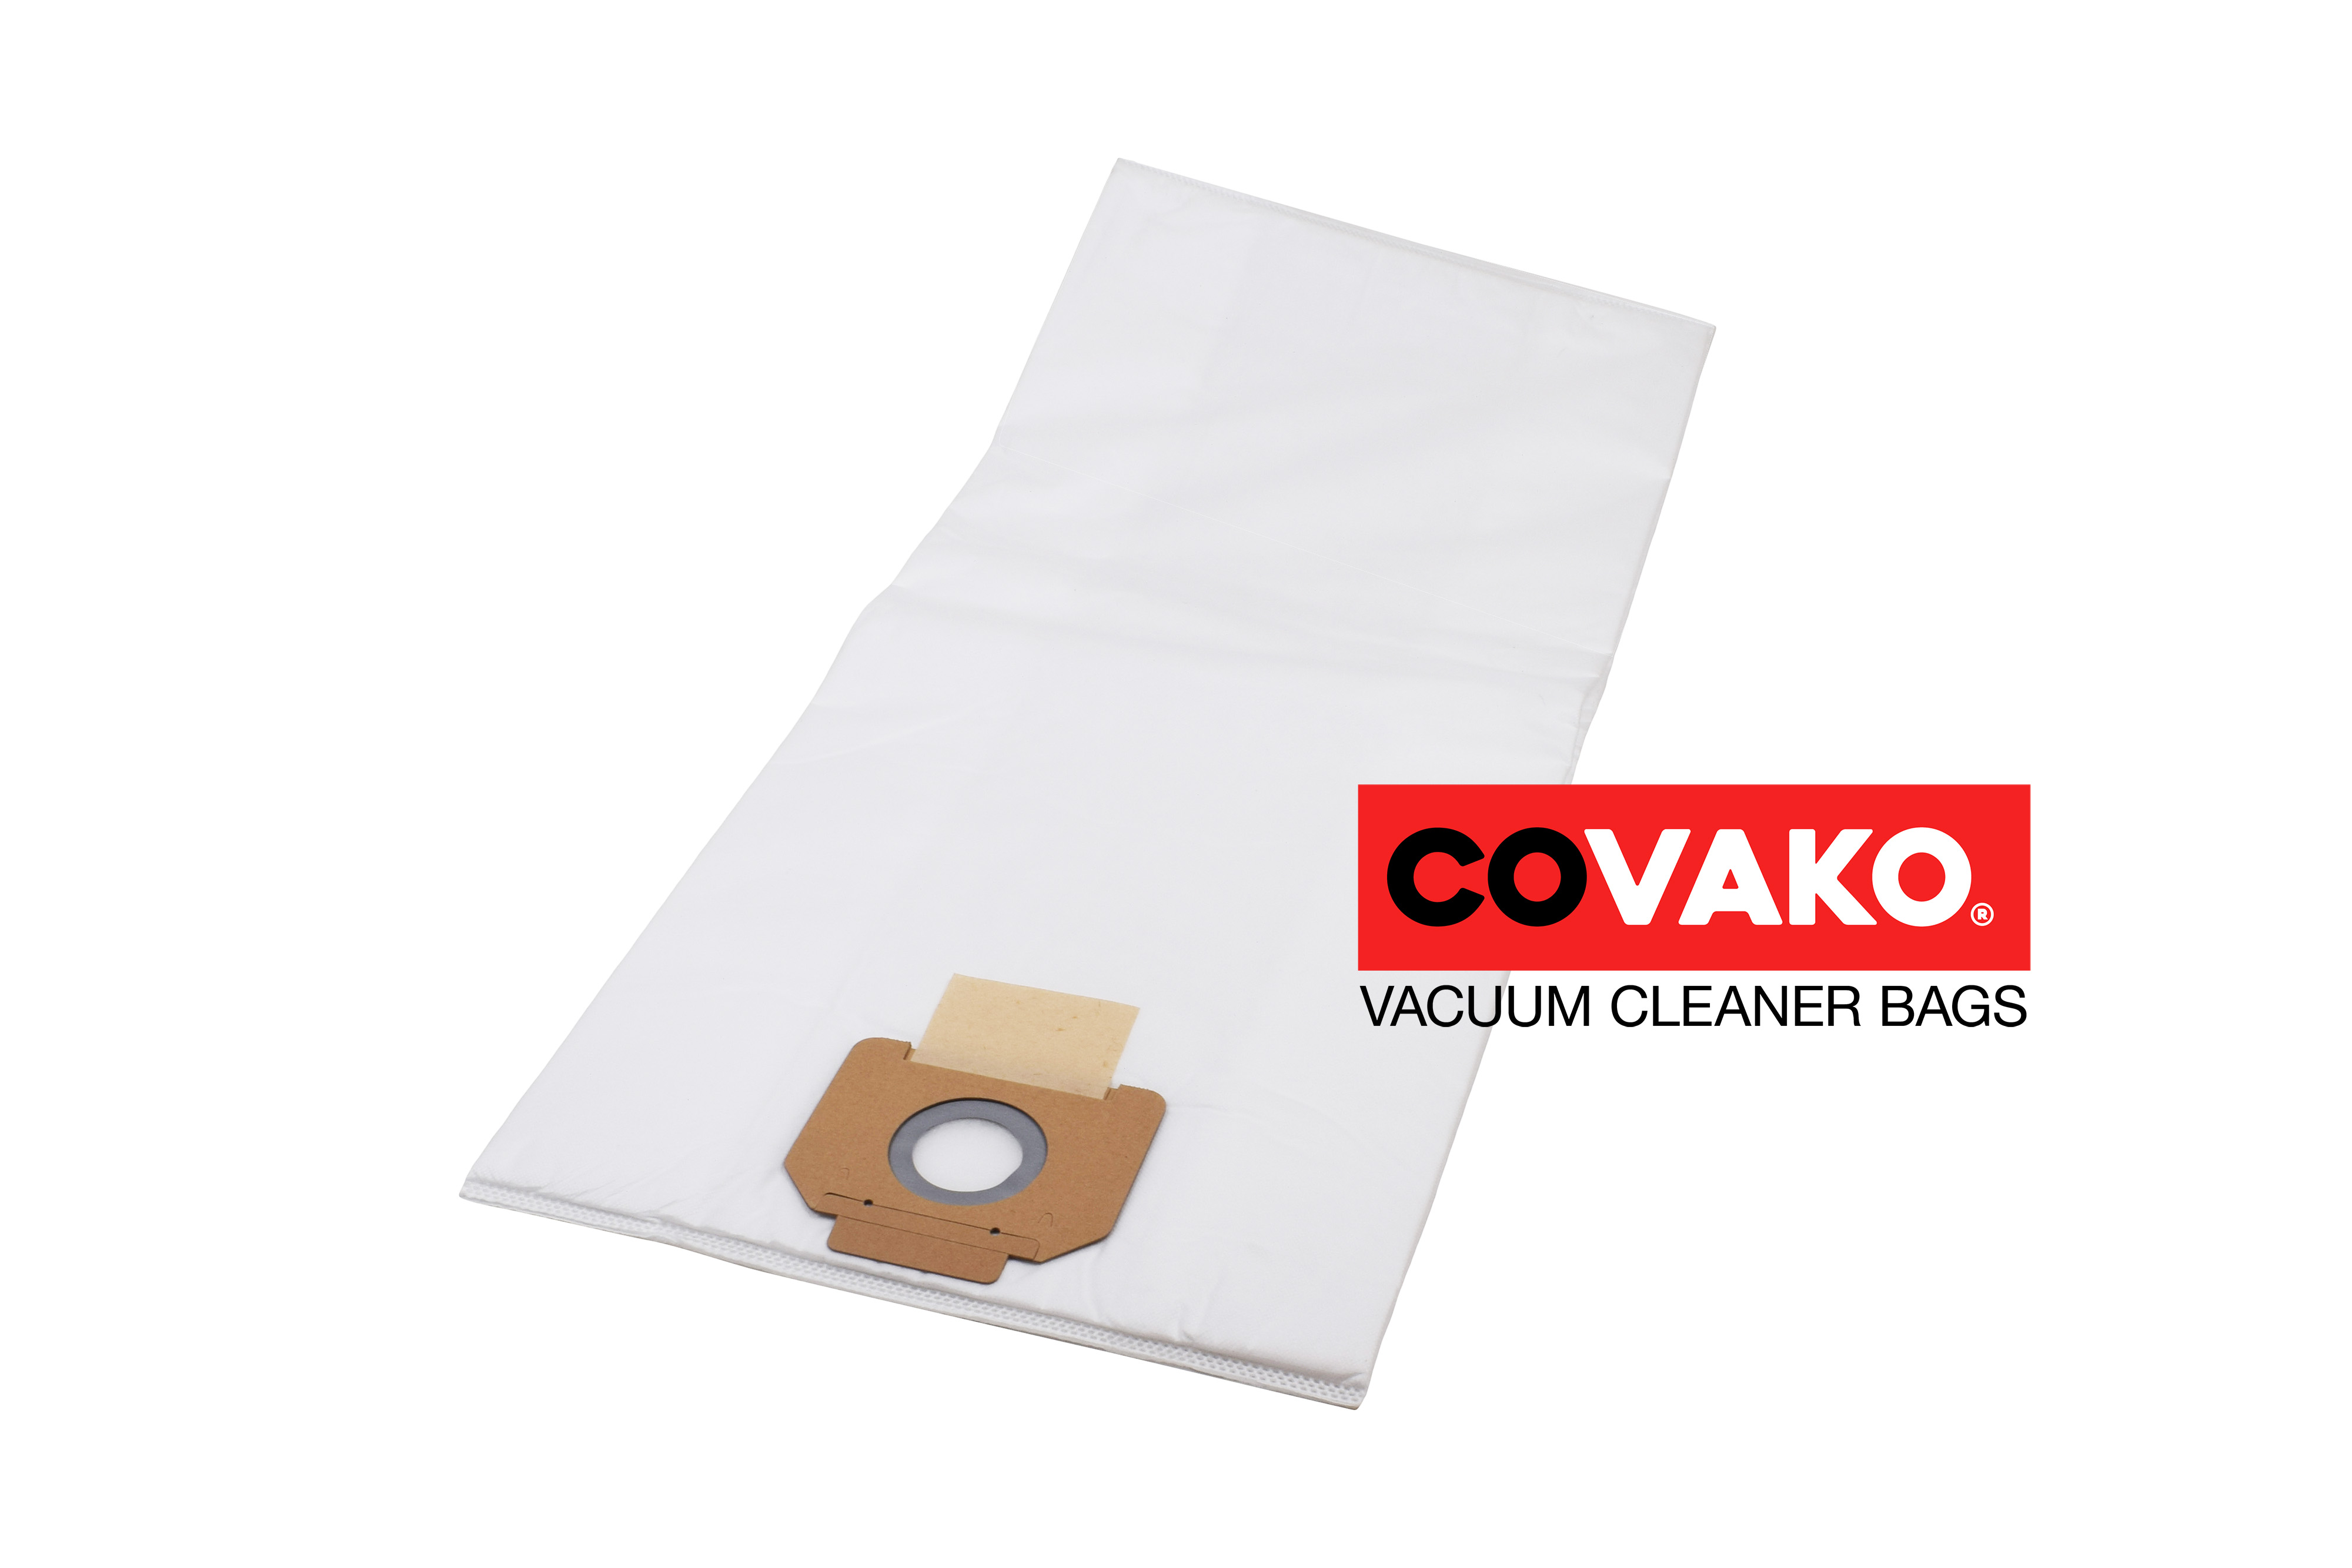 Gansow GS 3/62 W&D / Synthesis - Gansow vacuum cleaner bags